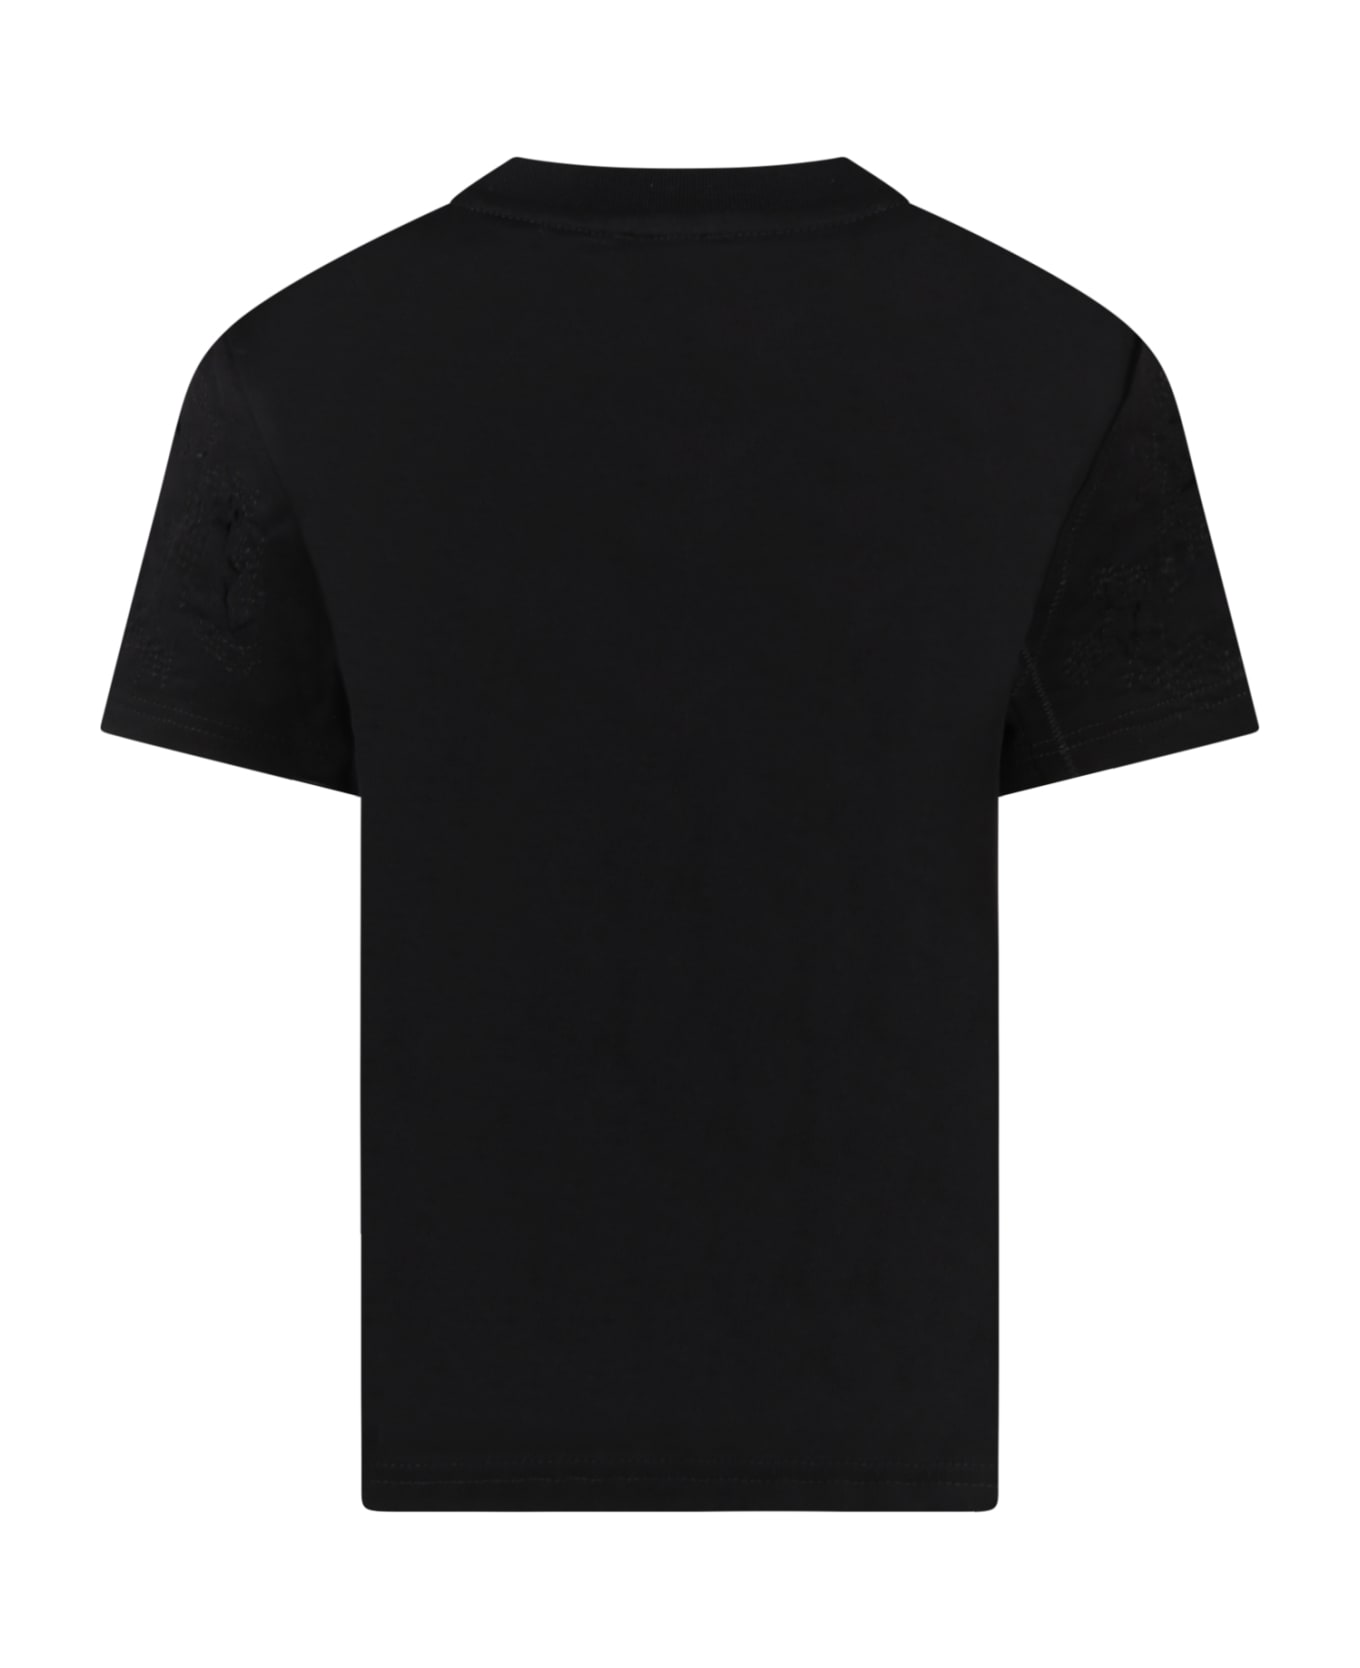 Givenchy Black T-shirt For Kids With Fake Rips And White Logo - Black